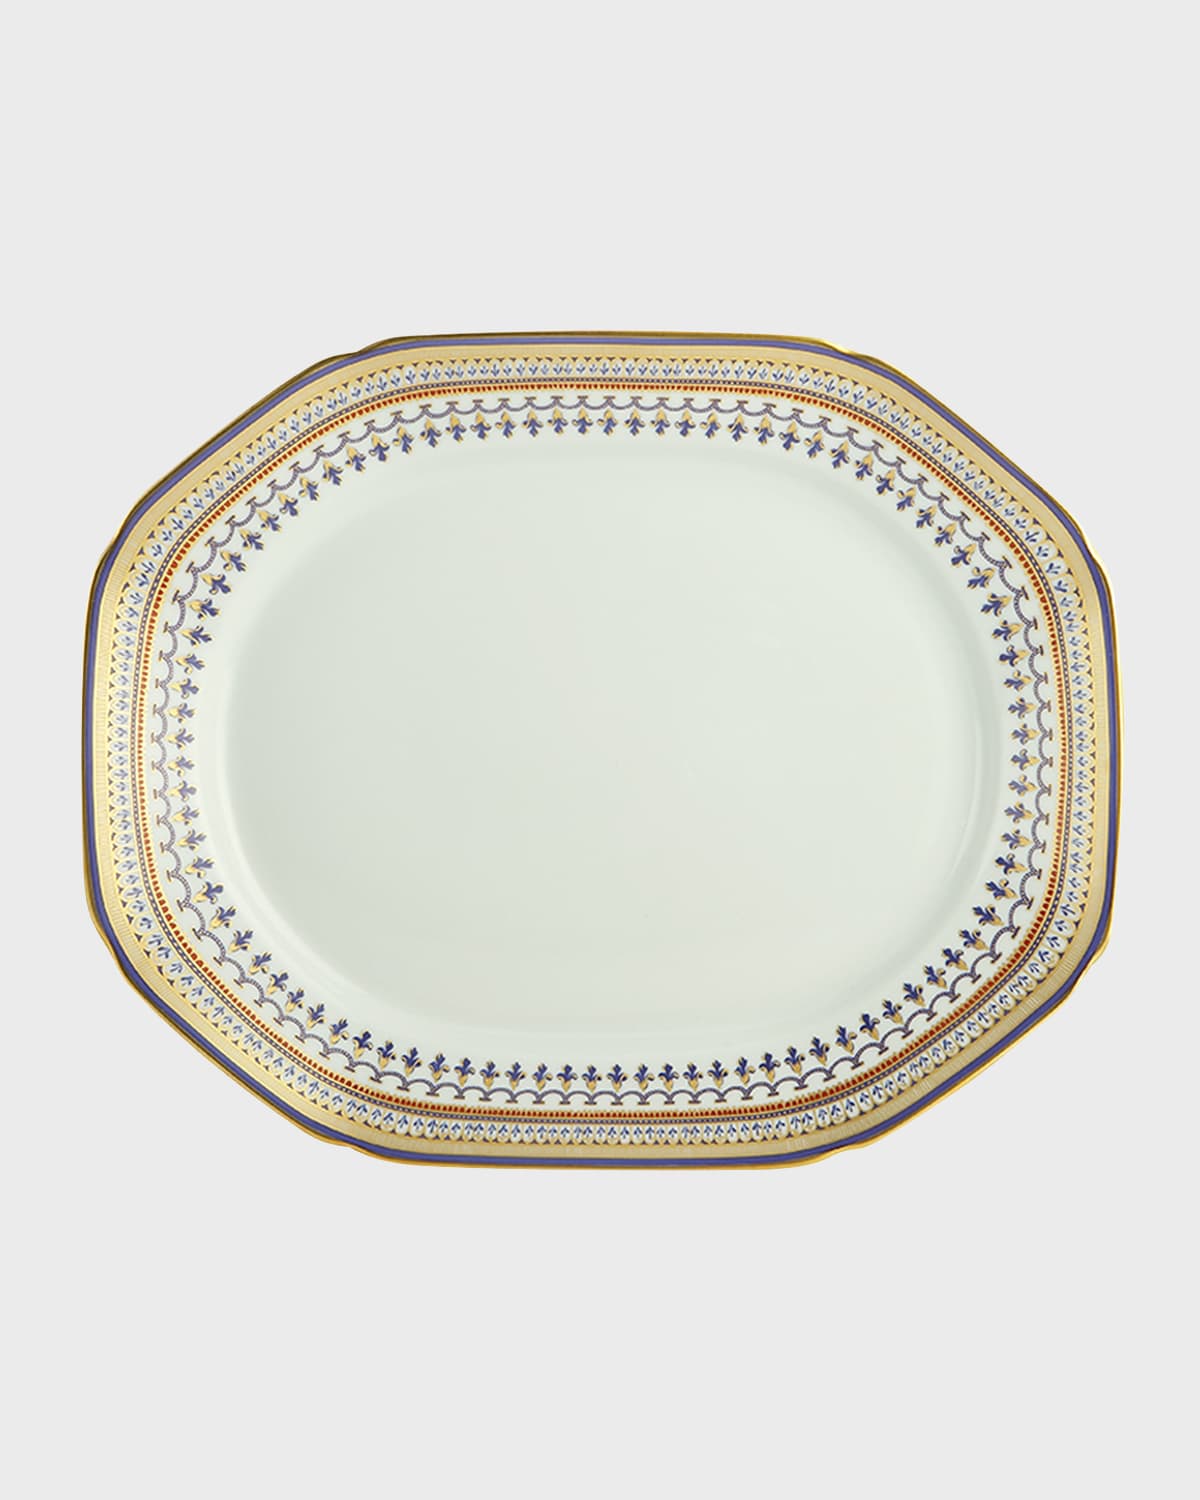 Mottahedeh Chinoise Blue Octagonal Platter